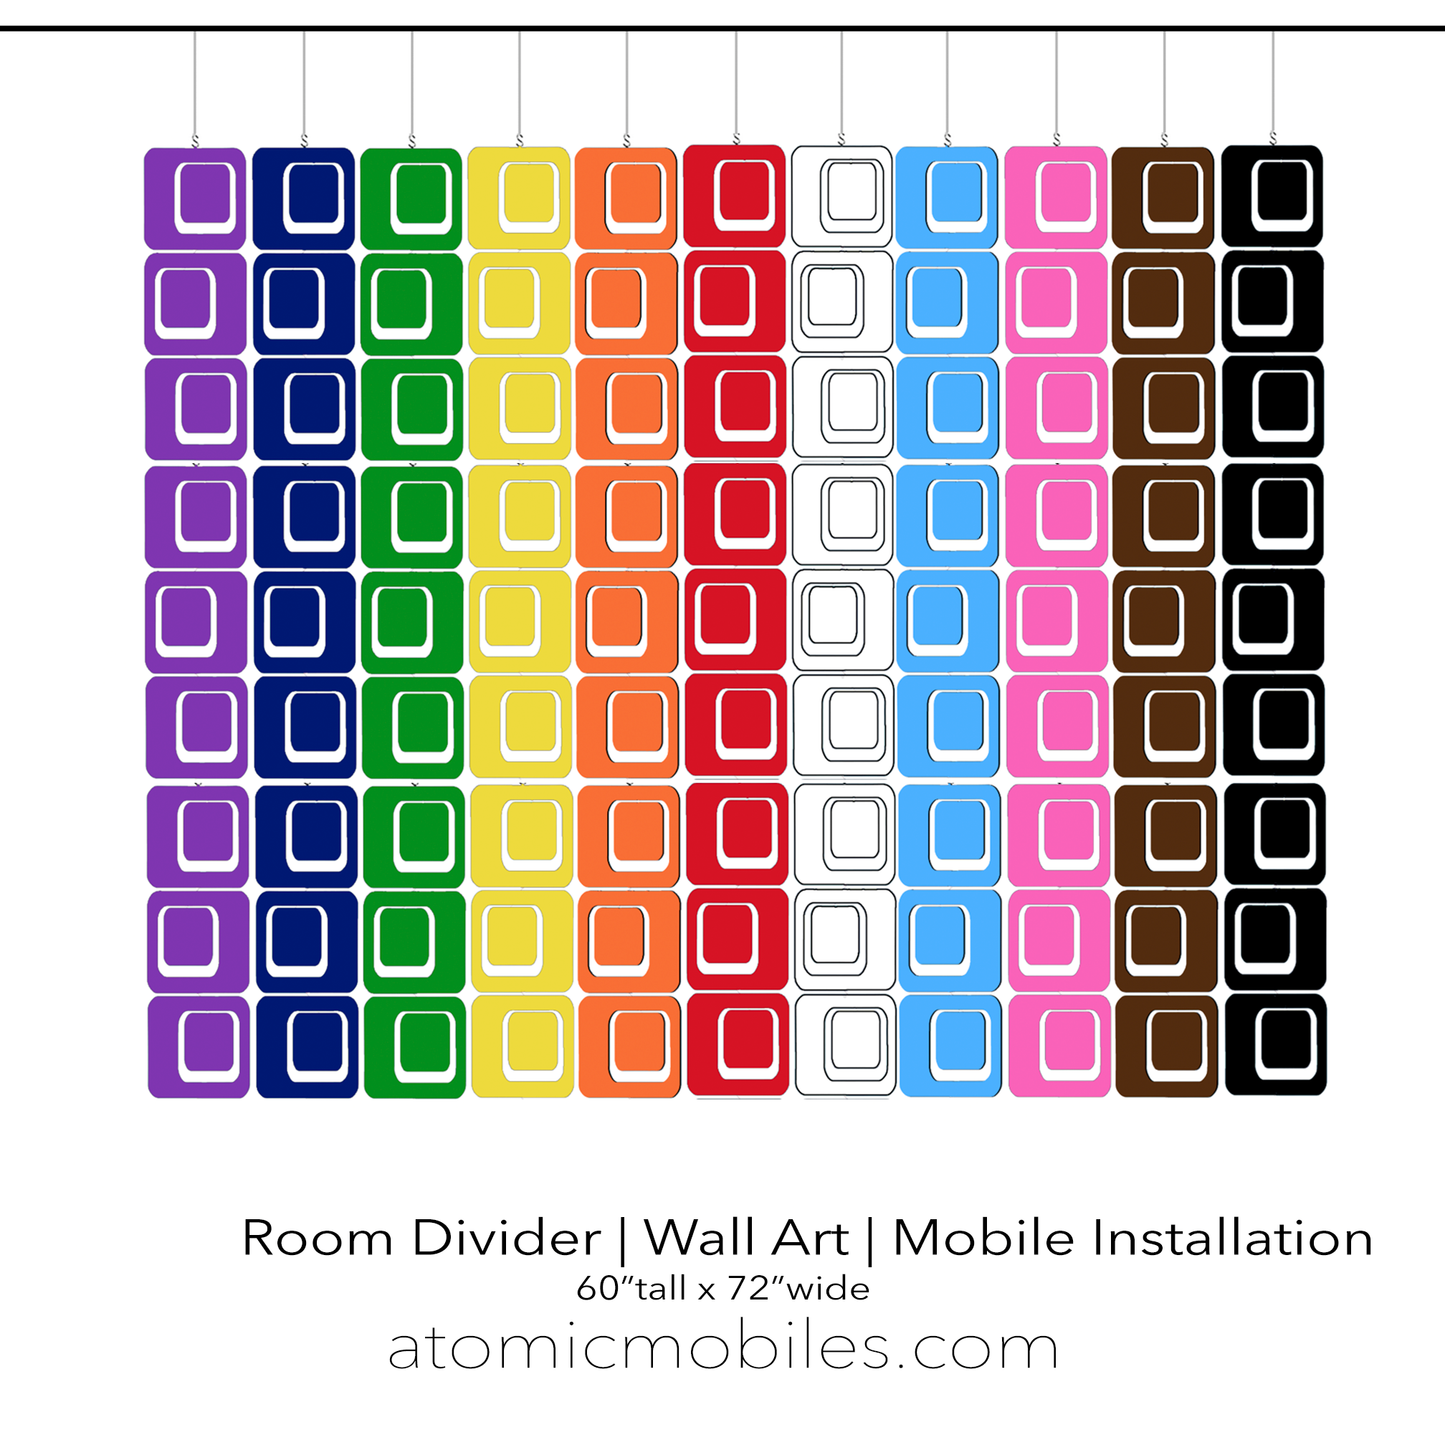 LGBTQ+ Unity Curtain, Wall Art, Mobile Installation, Room Divider 60"x72" by AtomicMobiles.com - LOVE IS LOVE